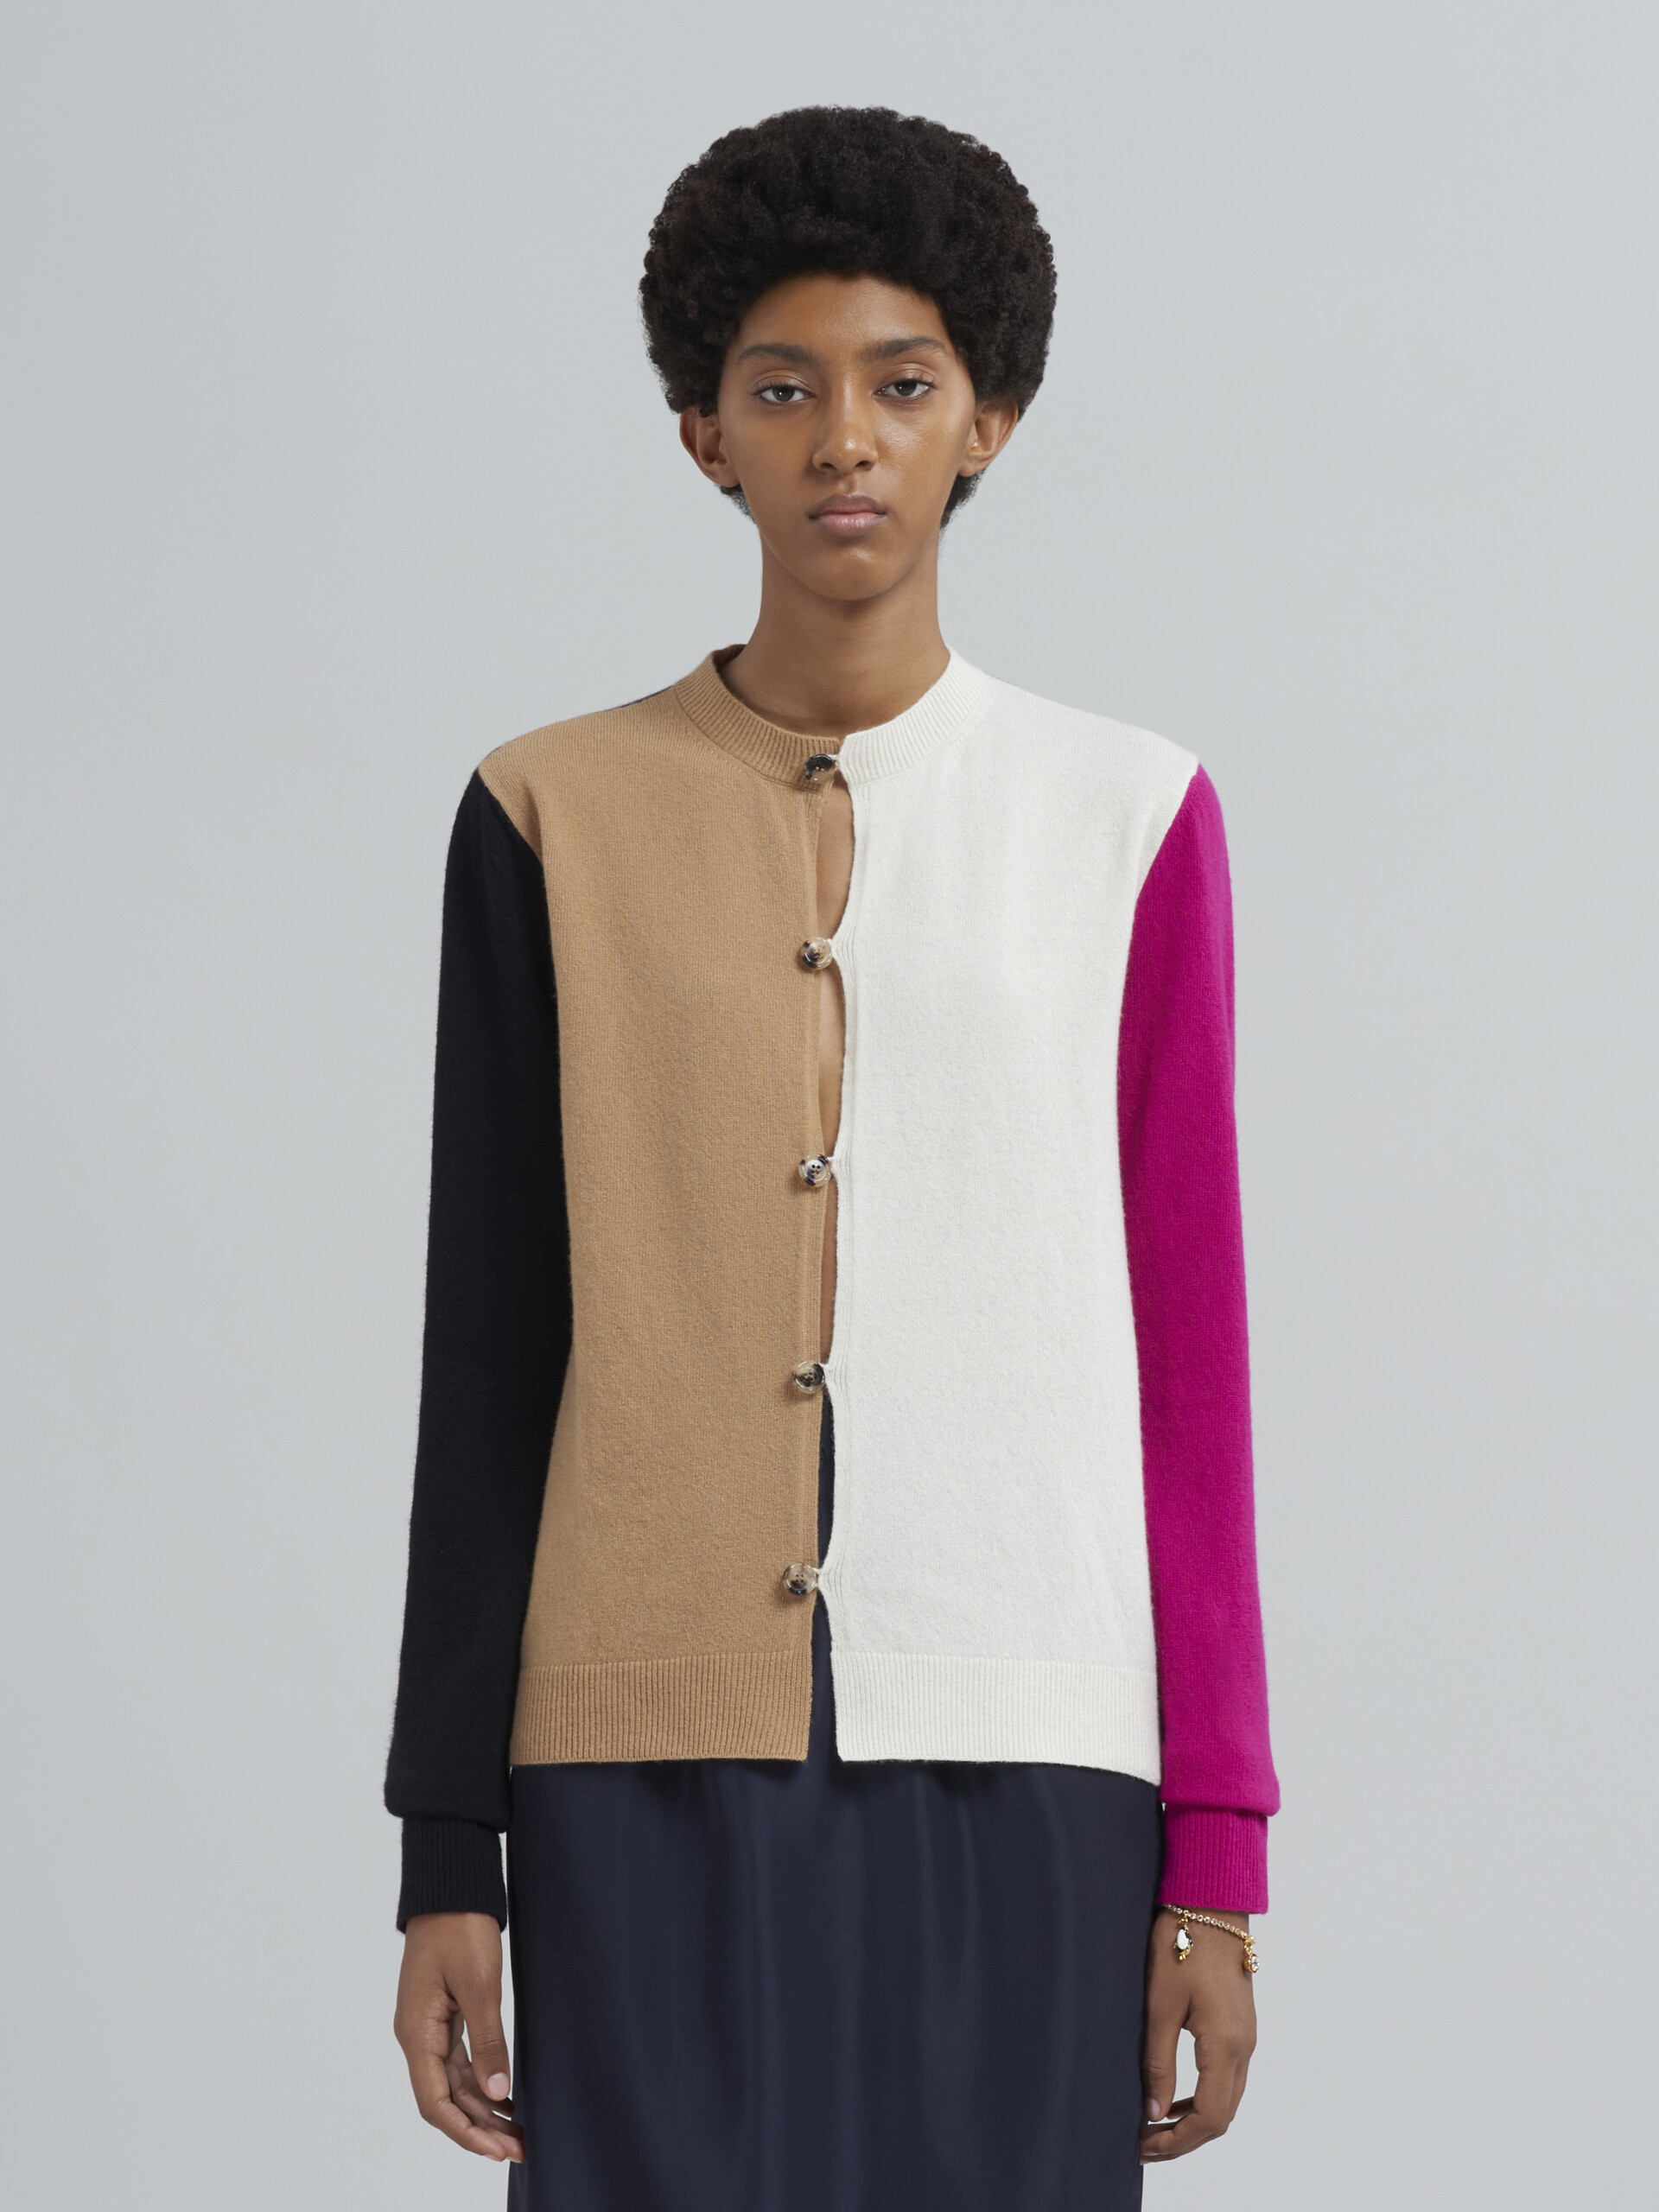 Colourblock wool and cashmere cardigan - Pullovers - Image 2